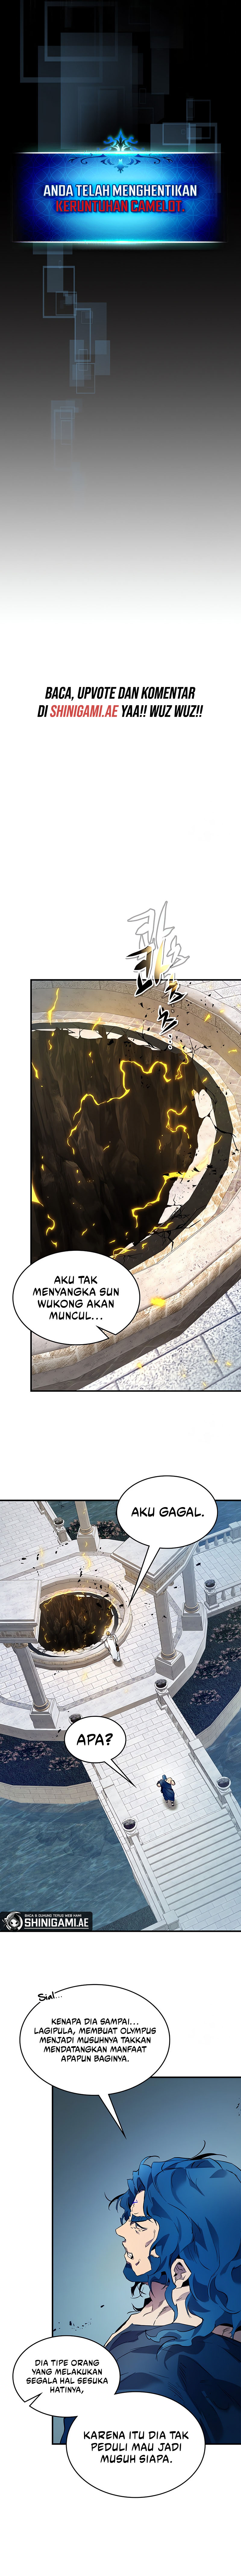 leveling-with-the-gods Chapter 93